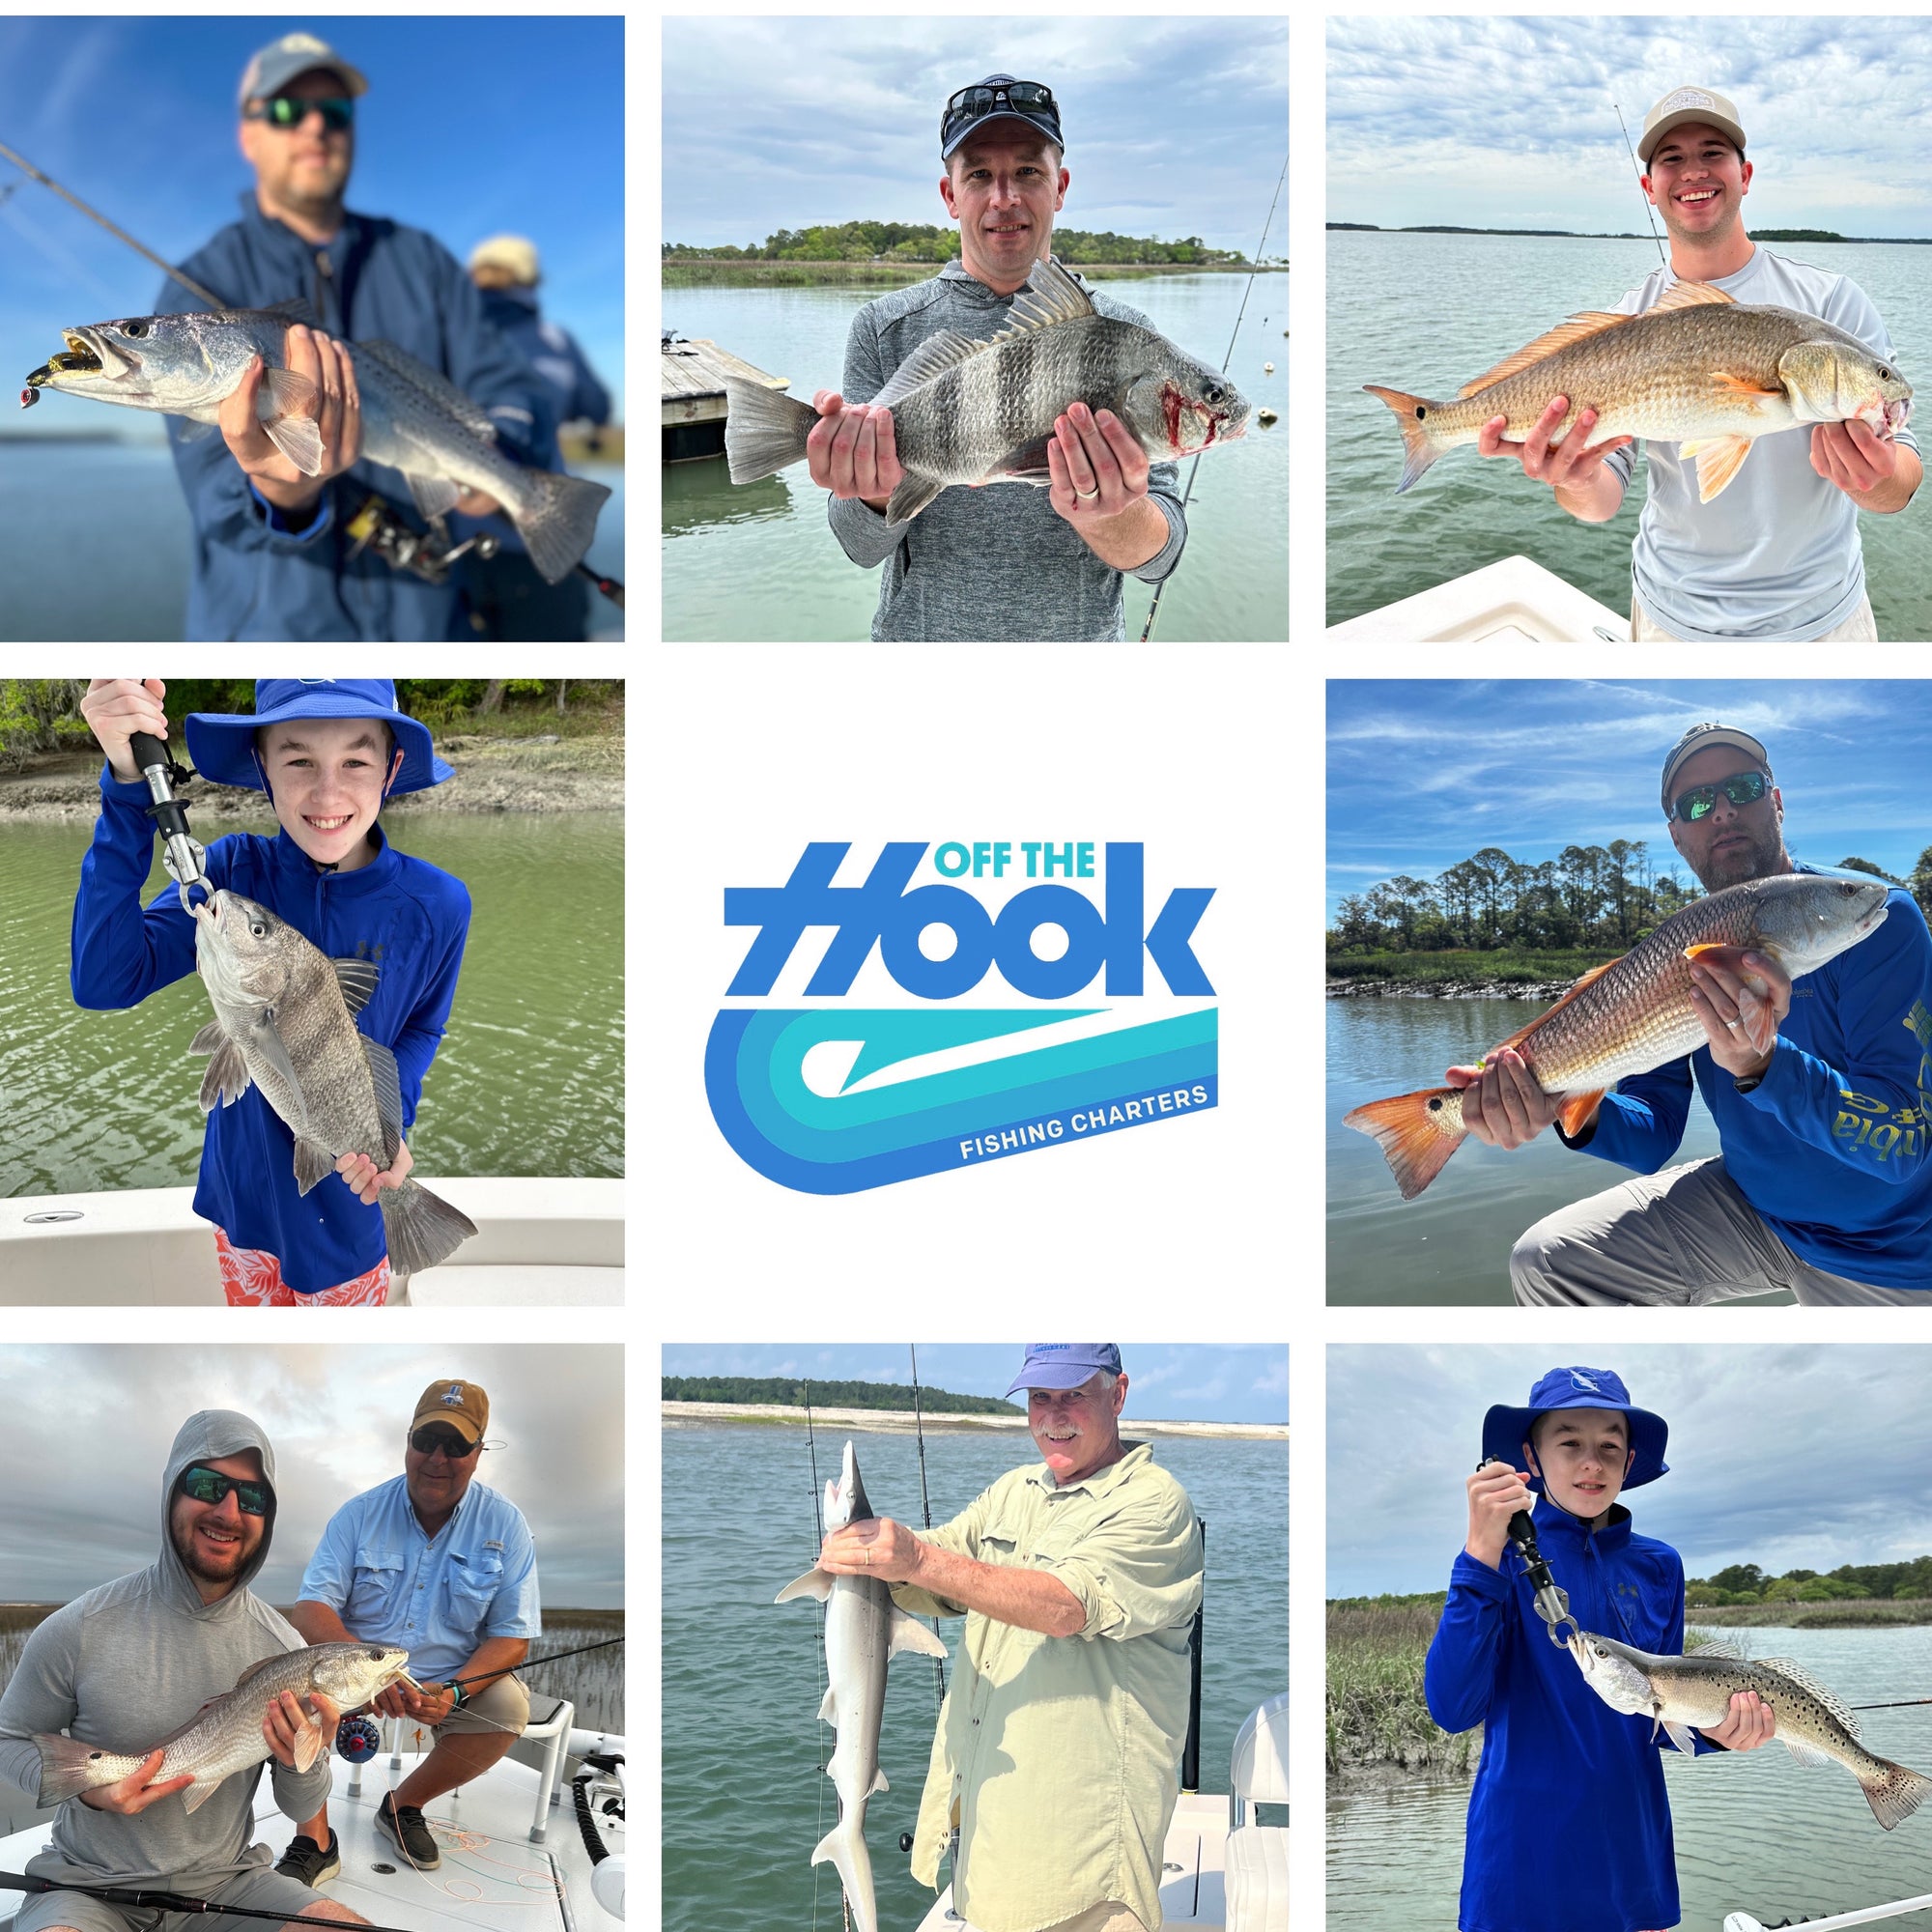 Some OTH catches from the last few days! The inshore action has been on 🔥!